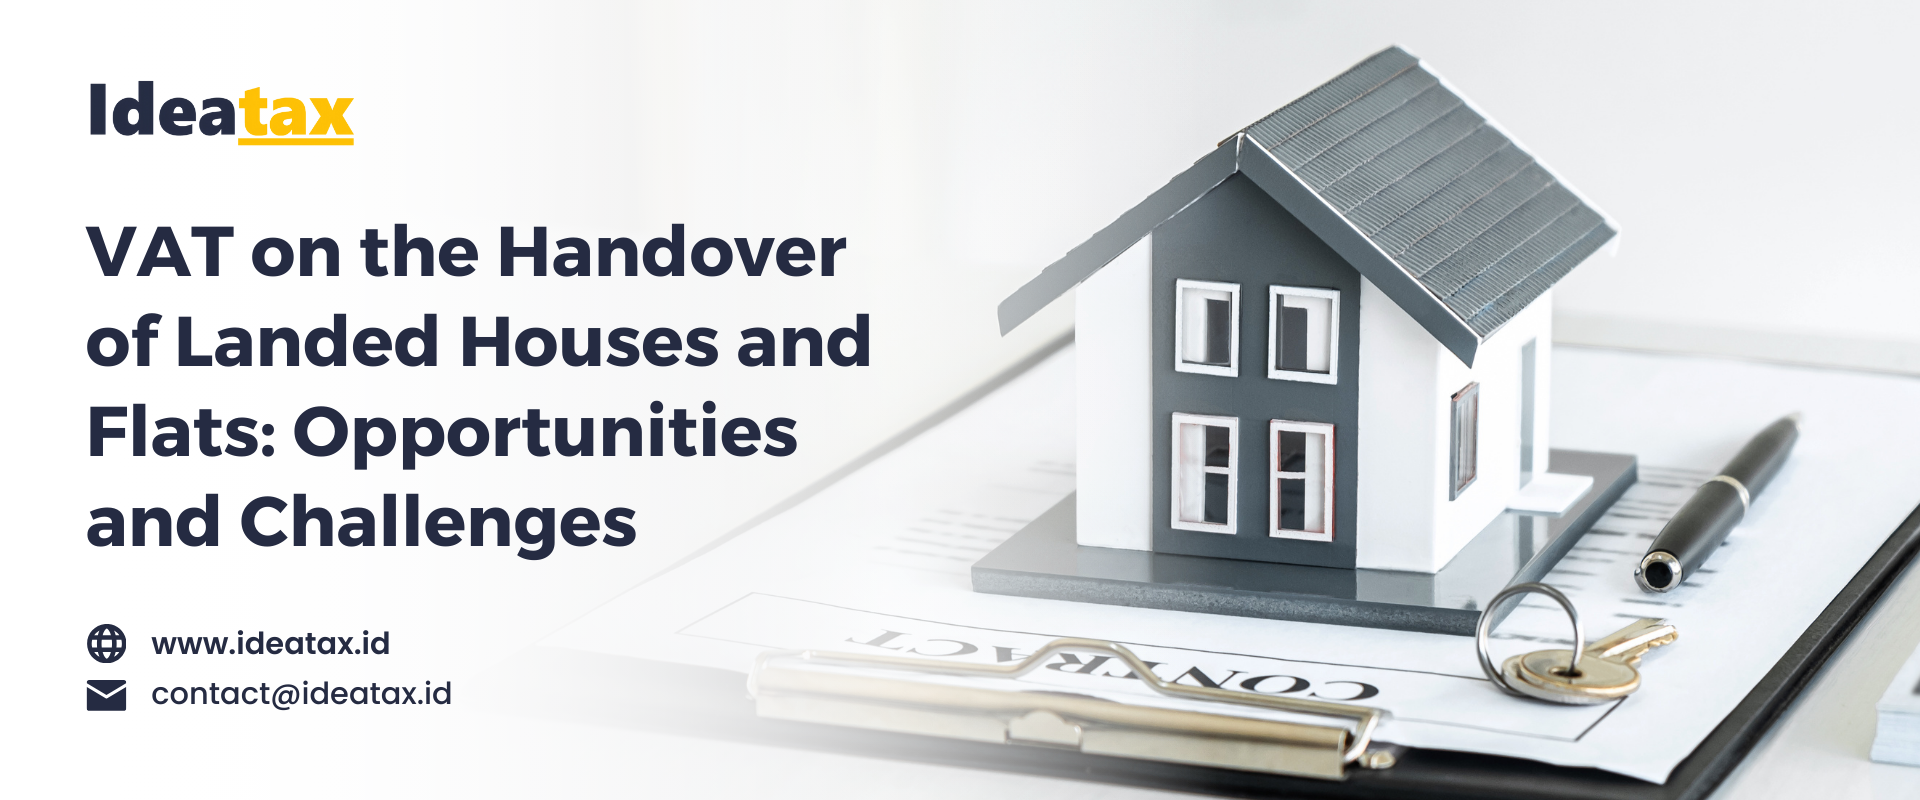 VAT on the Handover of Landed Houses and Flats: Opportunities and Challenges